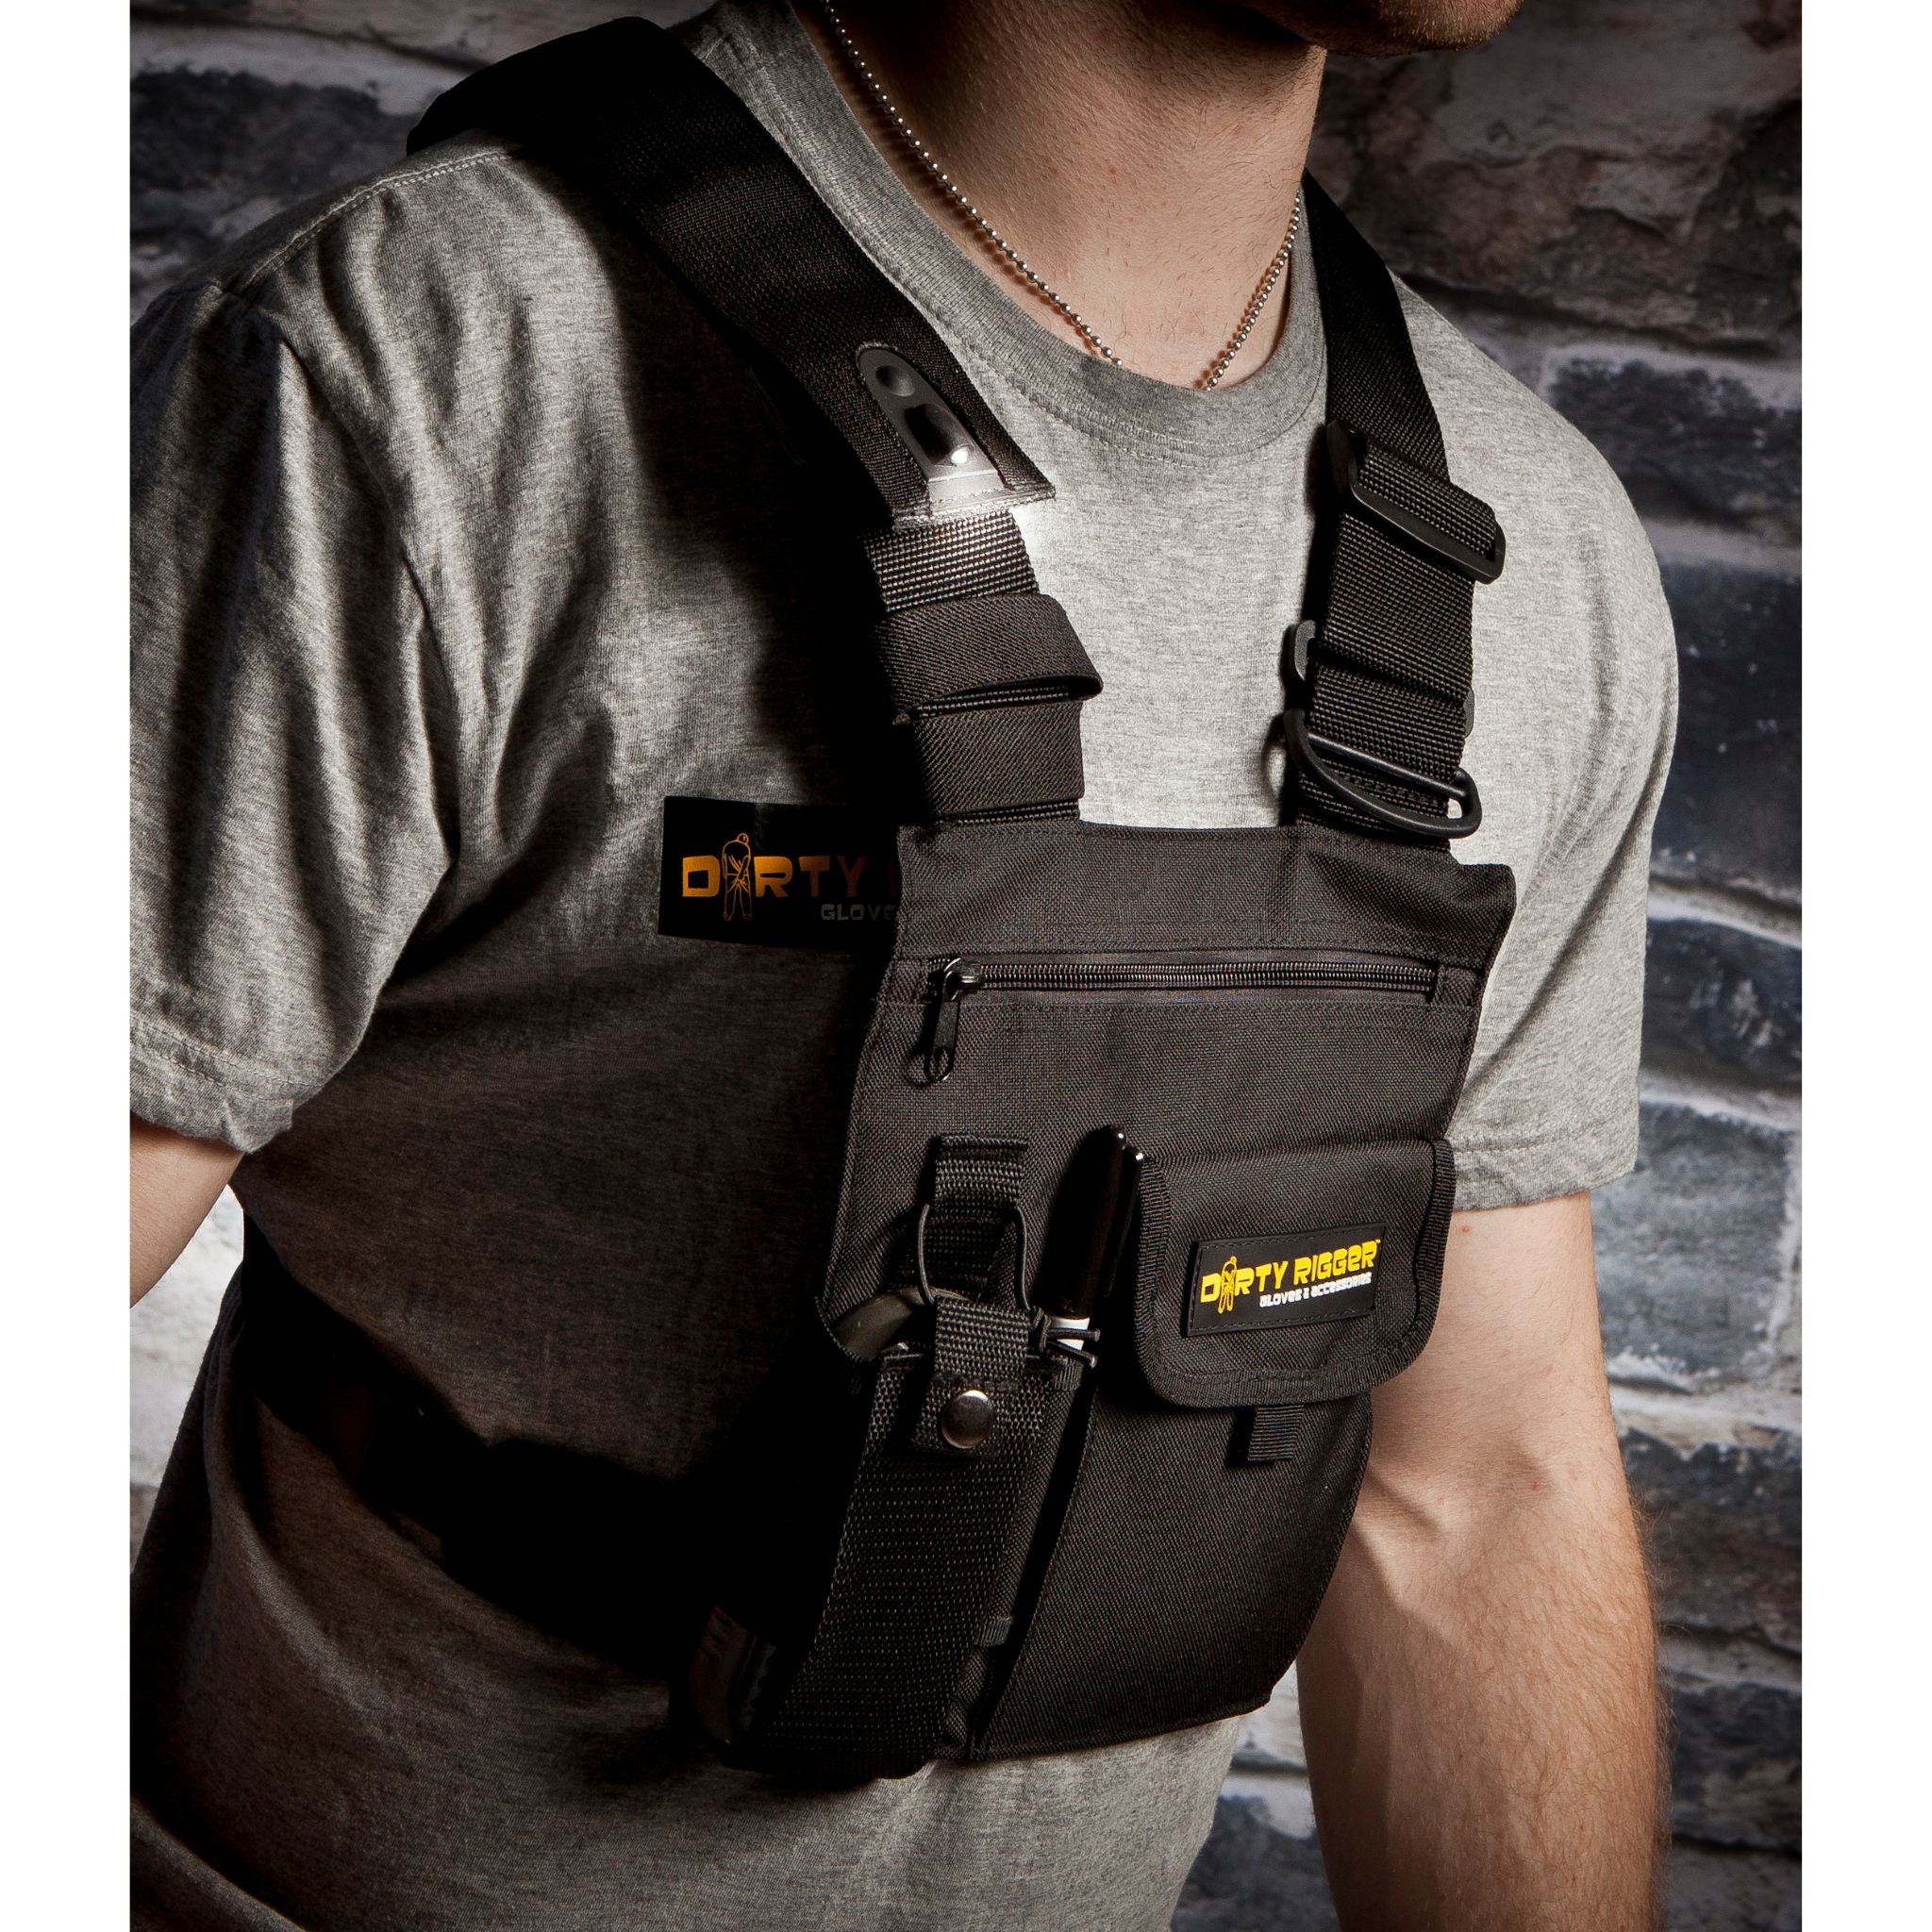 Chest Rig with LED Light - Stagehands Clothing